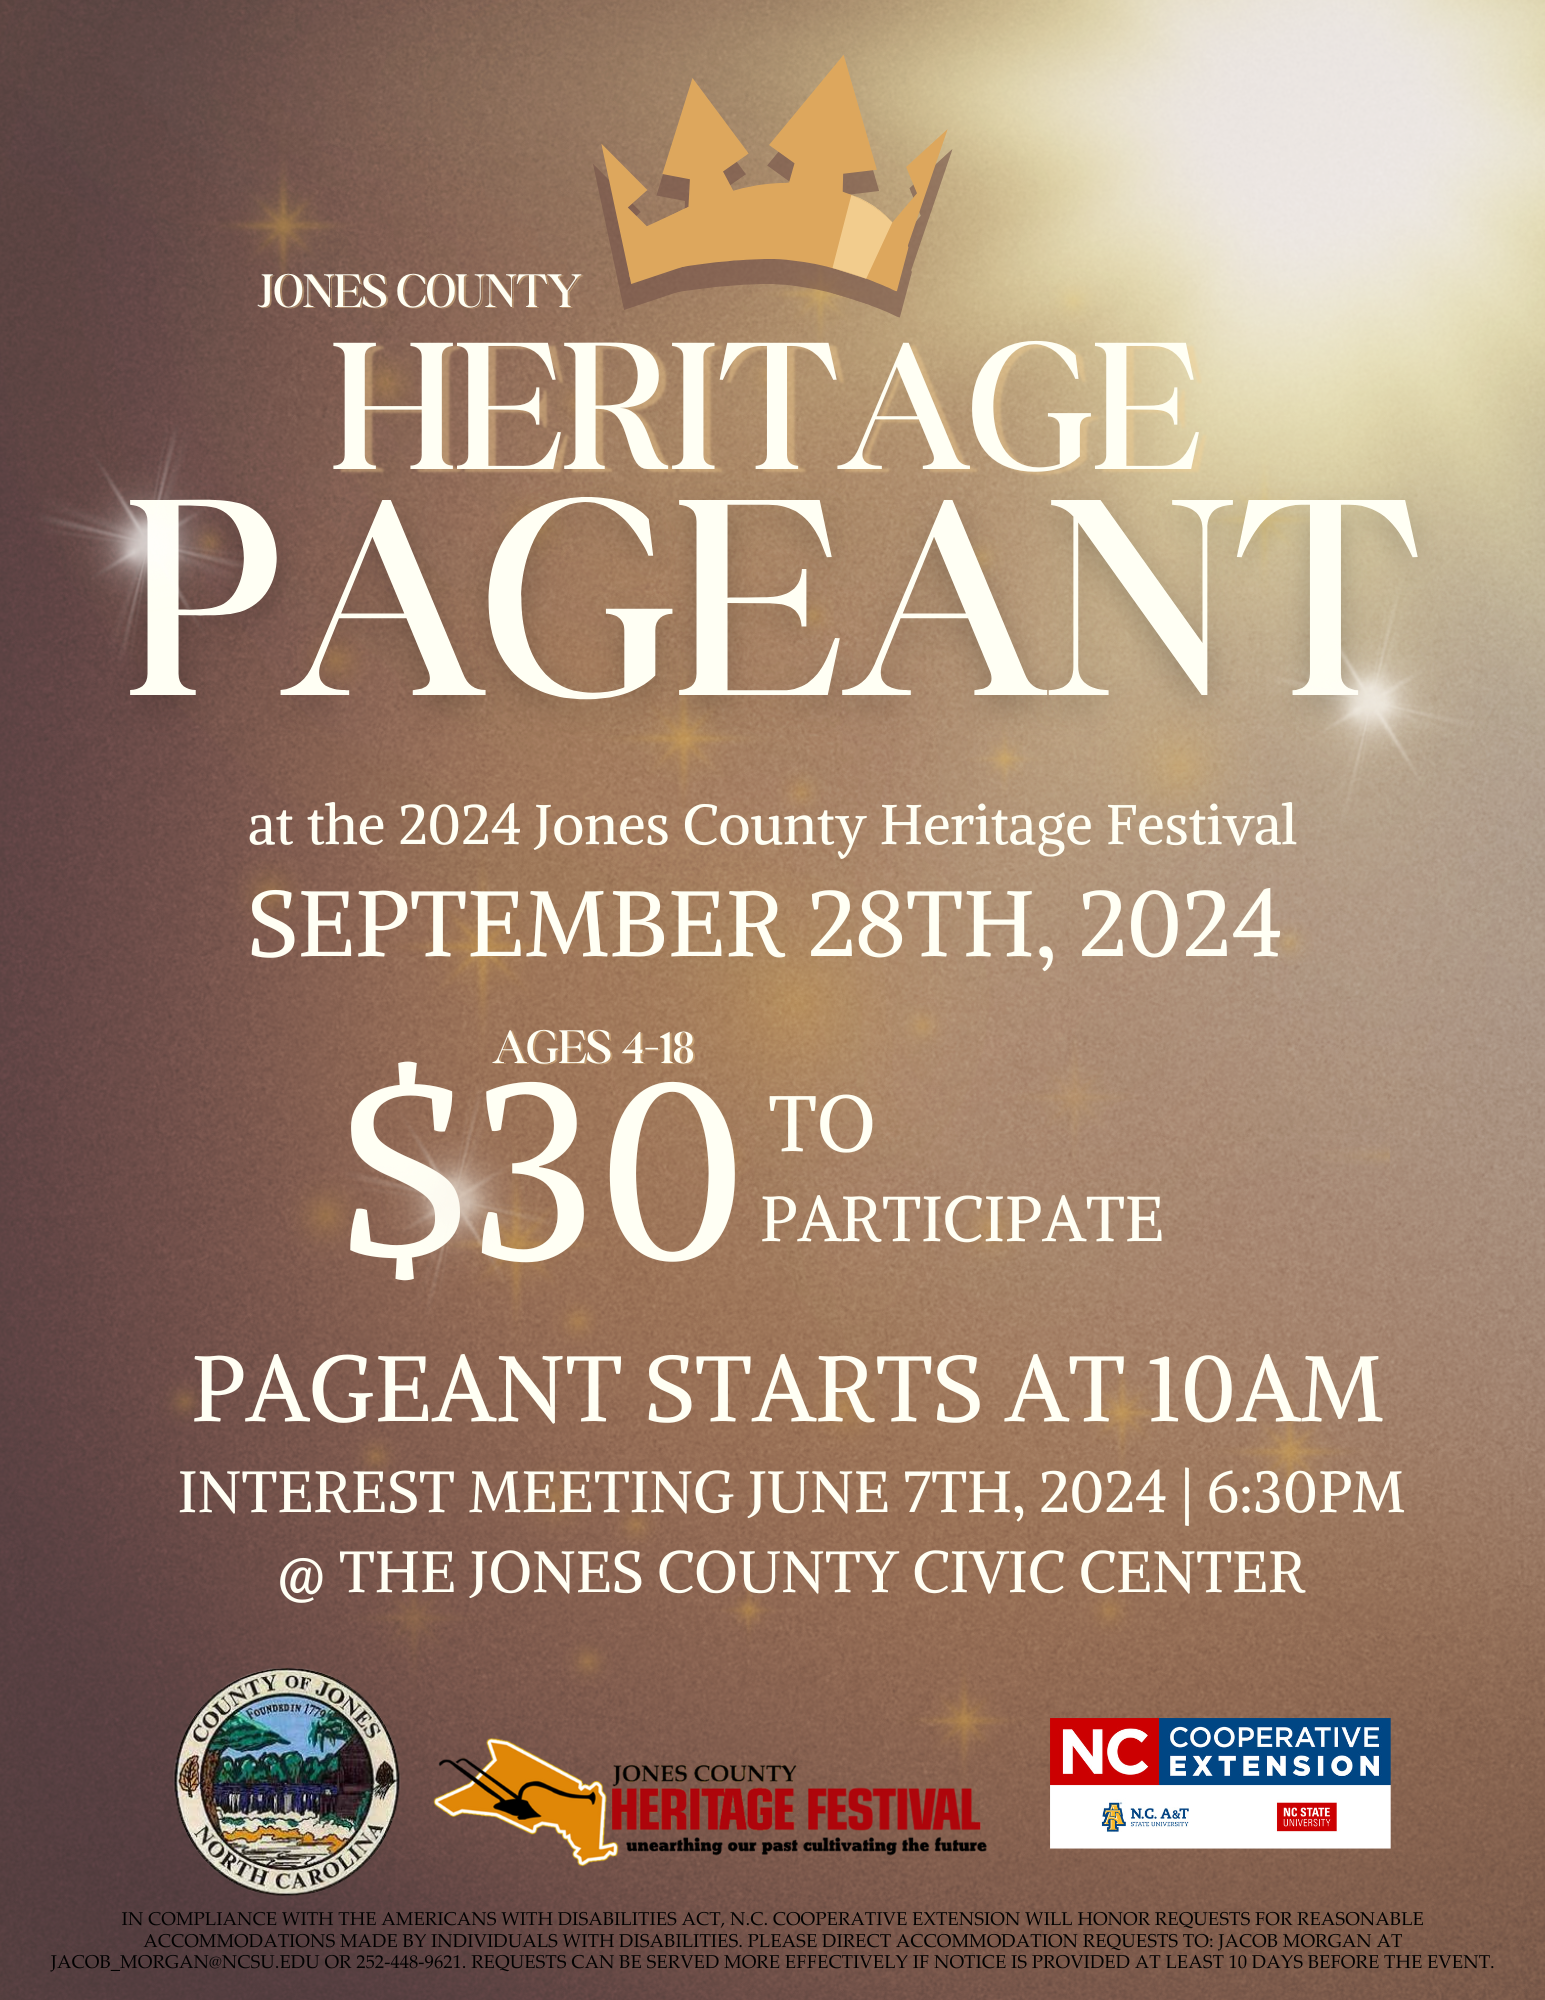 Jones County Heritage Pageant at the Jones County Heritage Festival on September 28th, 2024. $30 to participate for ages 4-18. Pageants starts at 10AM. Interest meeting June 7th, 2024 at 6:30PM at the Jones County Civic Center